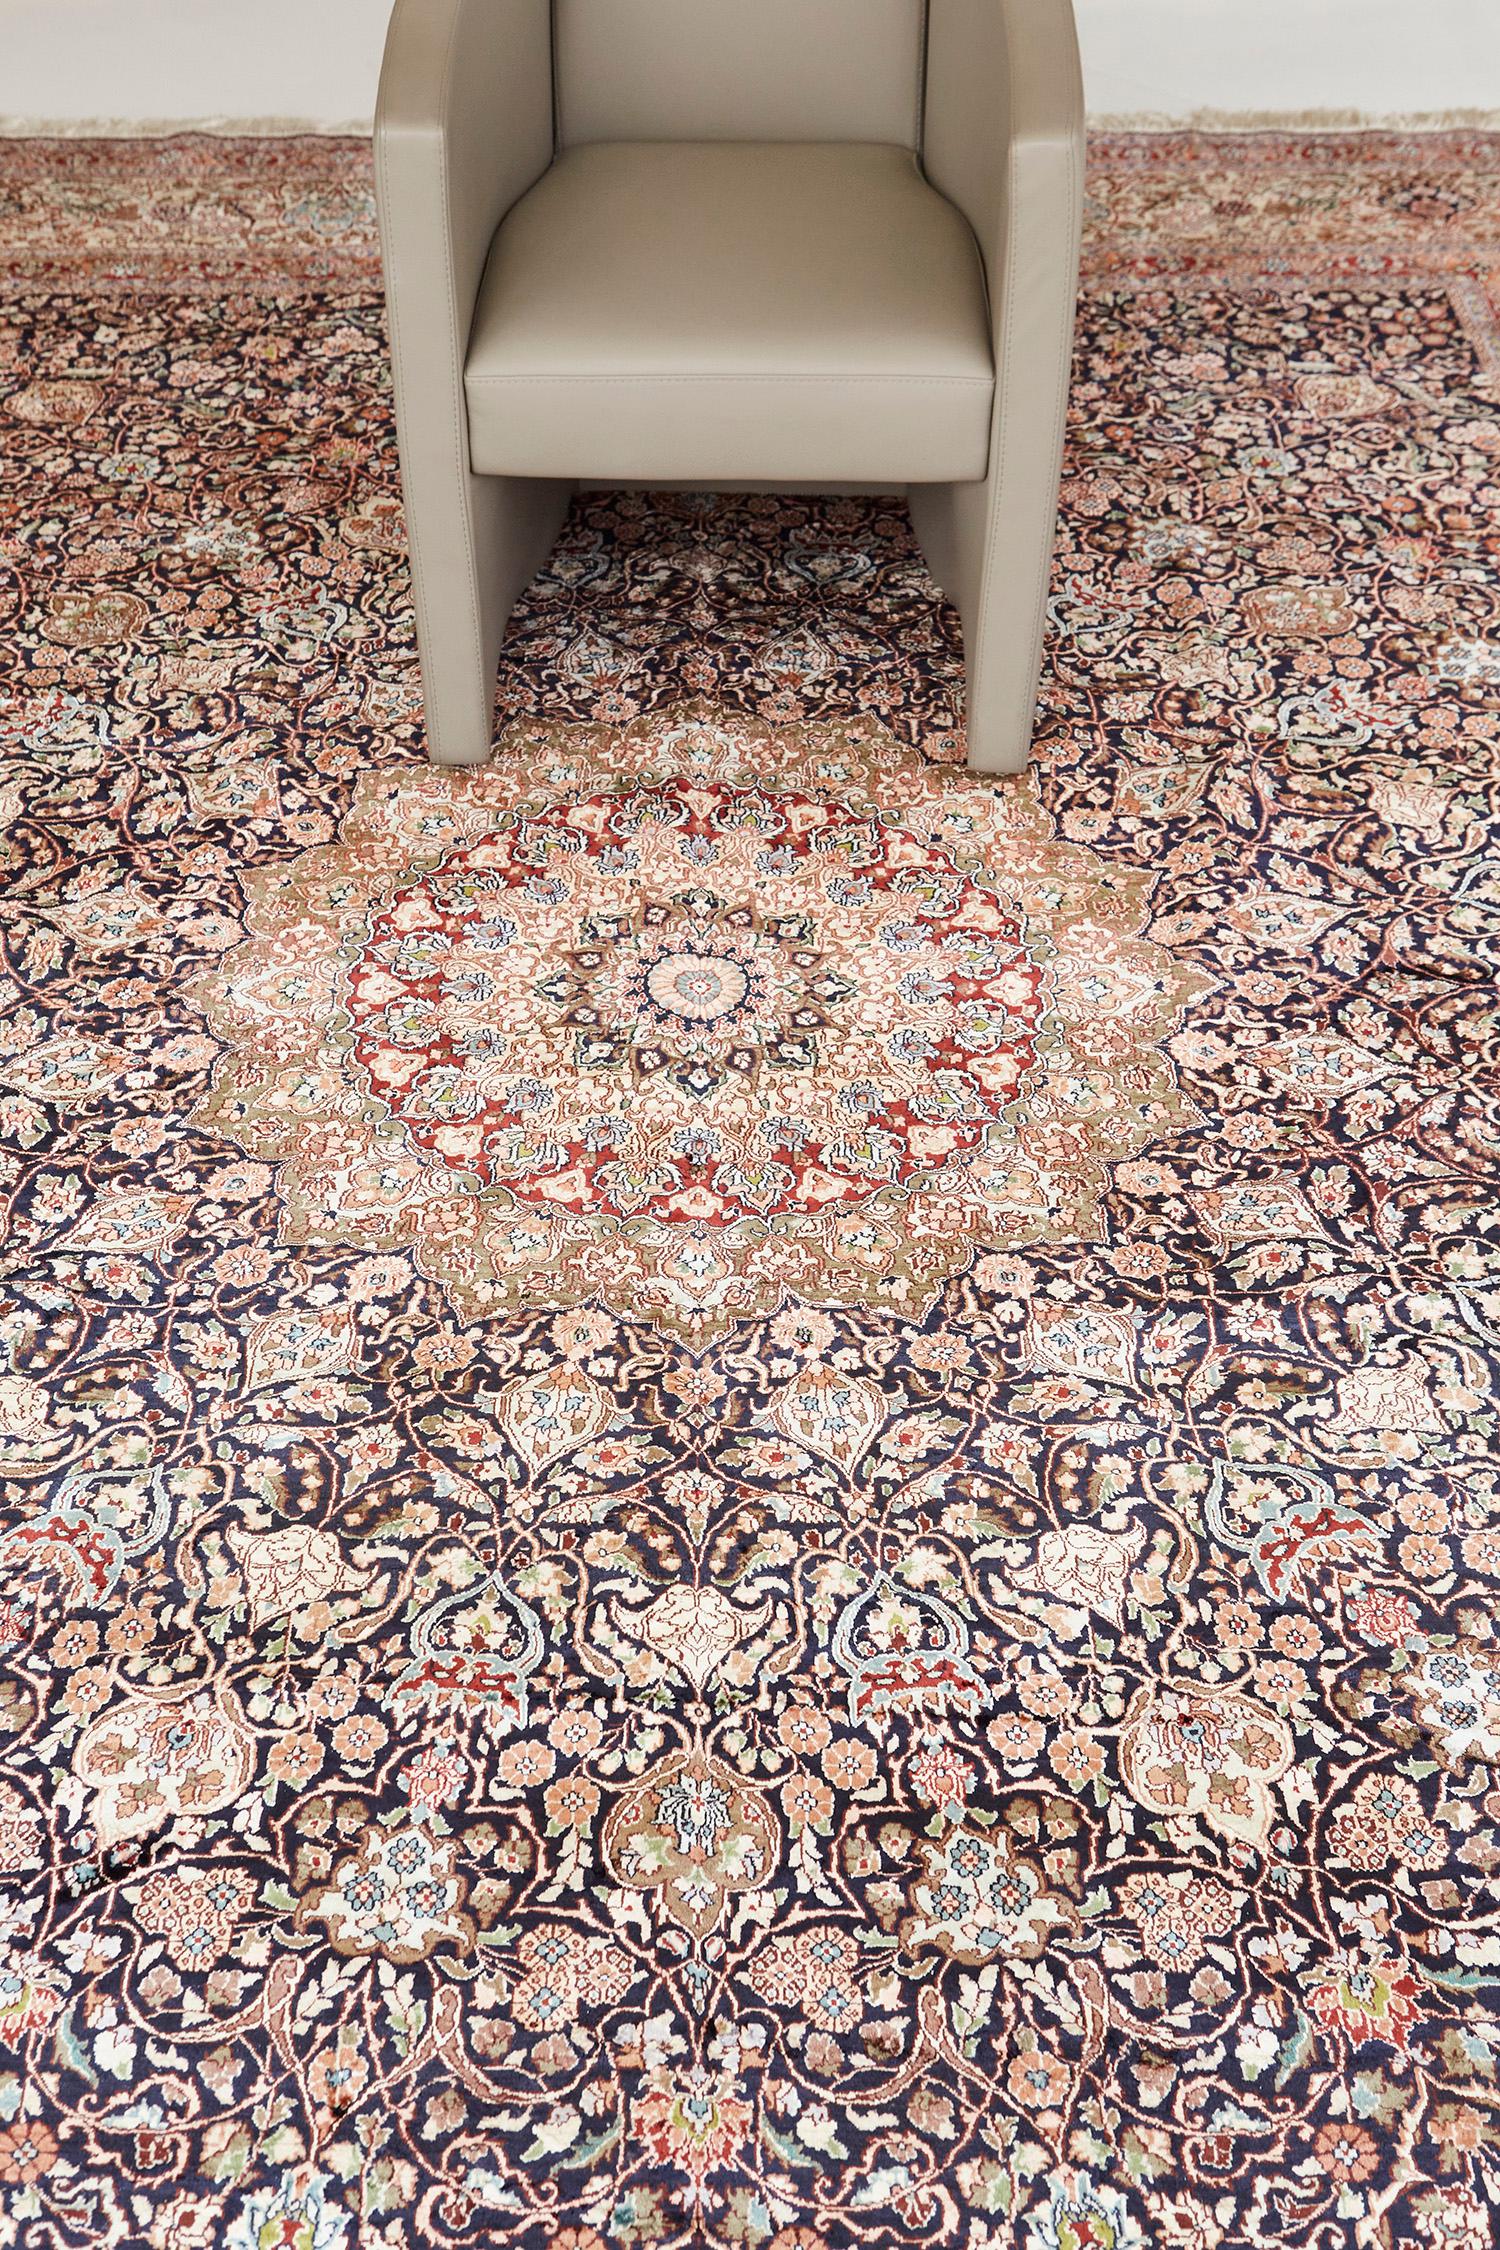 This vivid and trendy masterpiece of the Chinese Silk rug from our collection features a majestic all-over design. The grandiose round pattern with a floral design makes the rug more stylish. A glorious lush and brown pattern is perfect for a